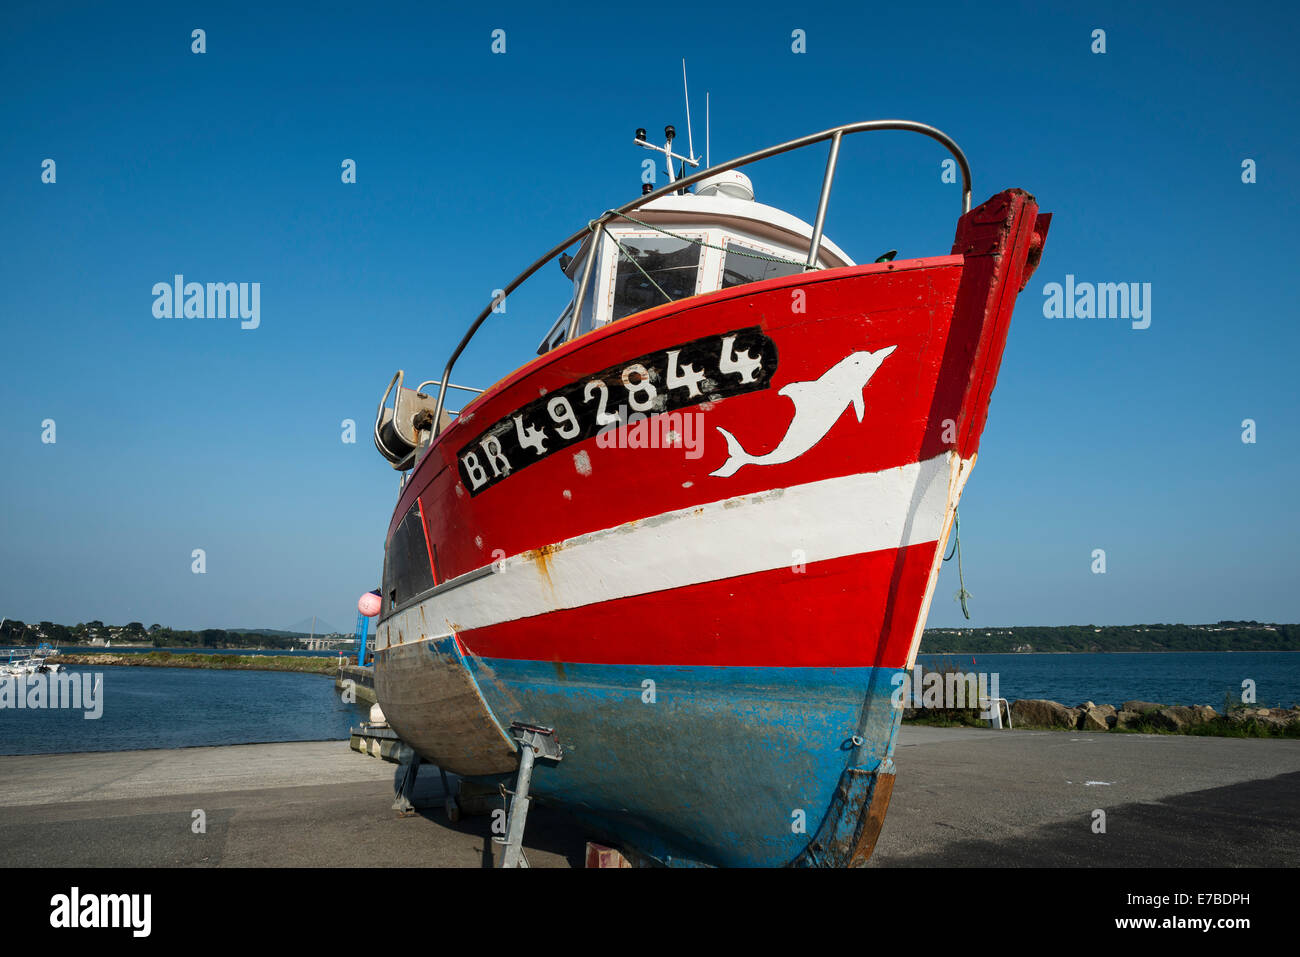 Fishing boat at the pier, Brest, Brittany, France Stock Photo